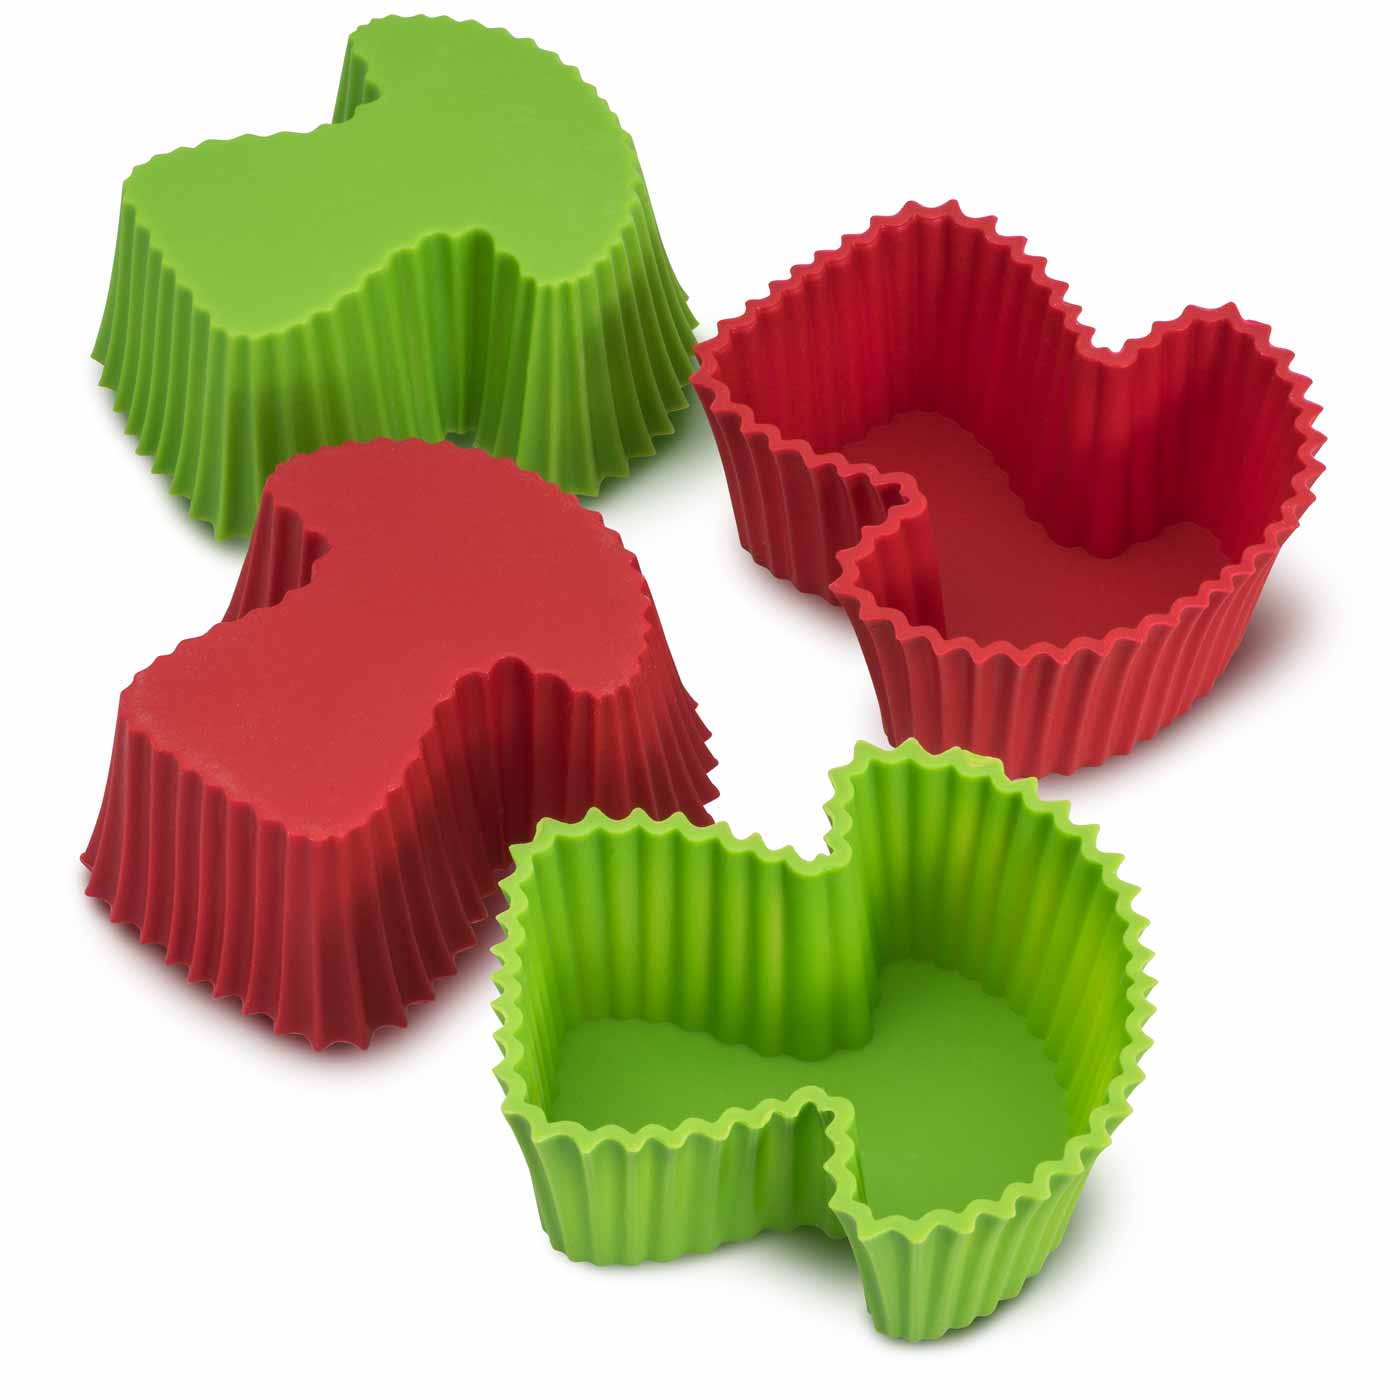 Children's silicone cupcake moulds